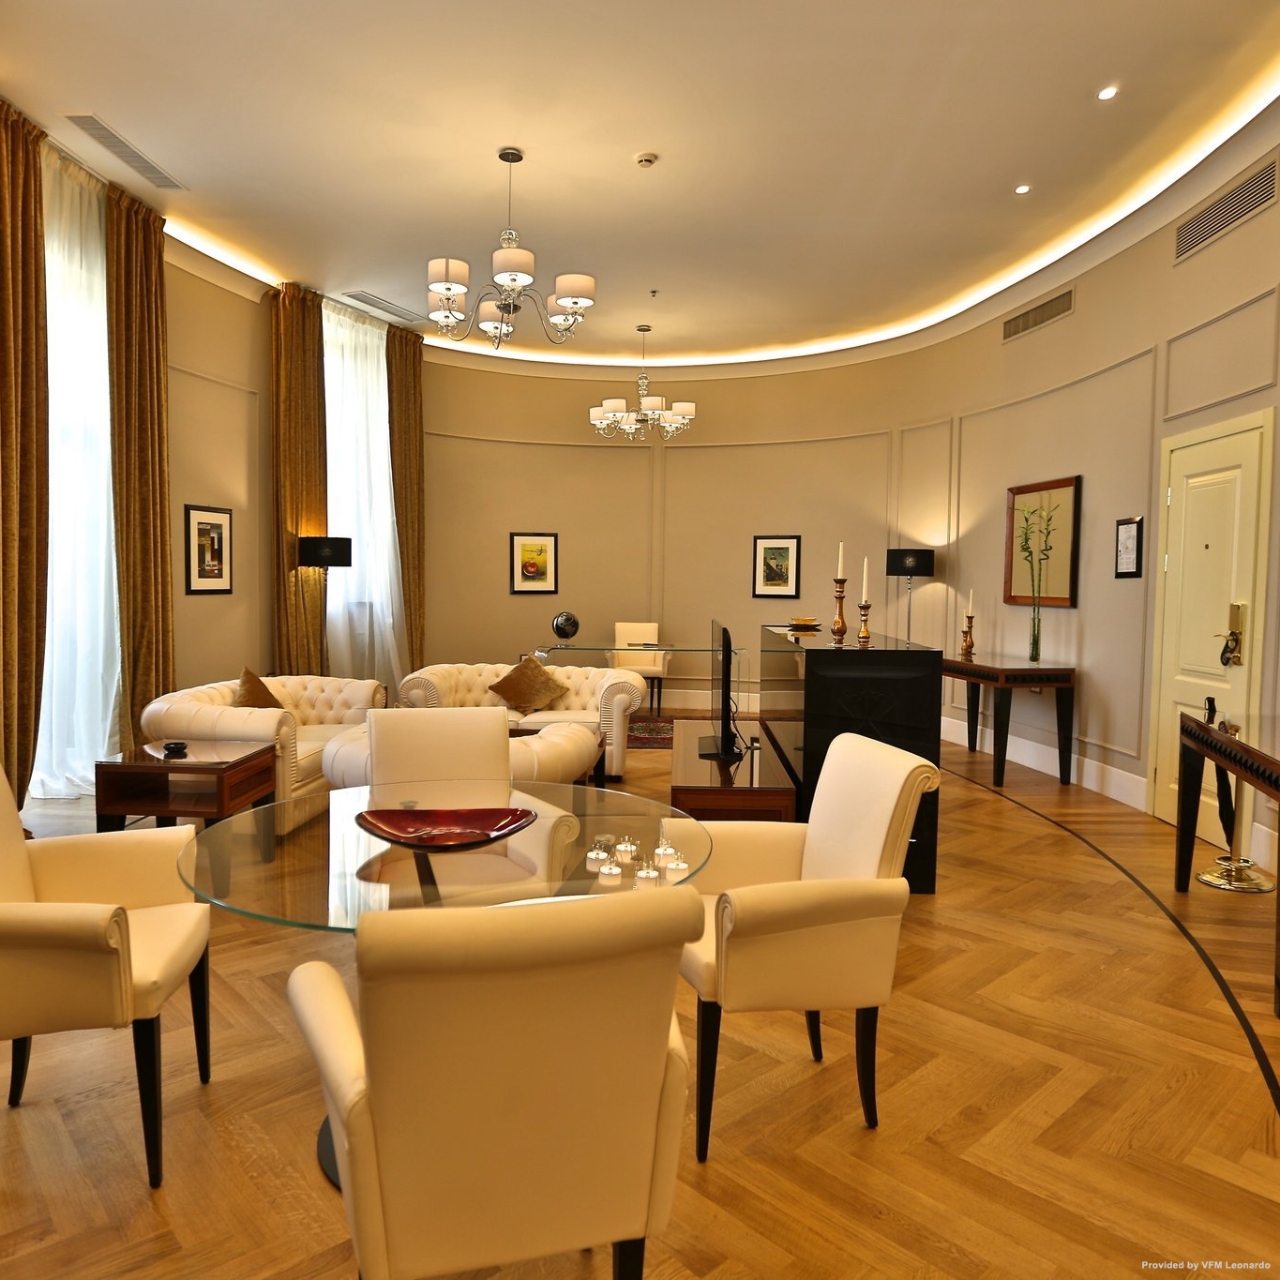 Grand Hotel Yerevan Armenia At Hrs With Free Services